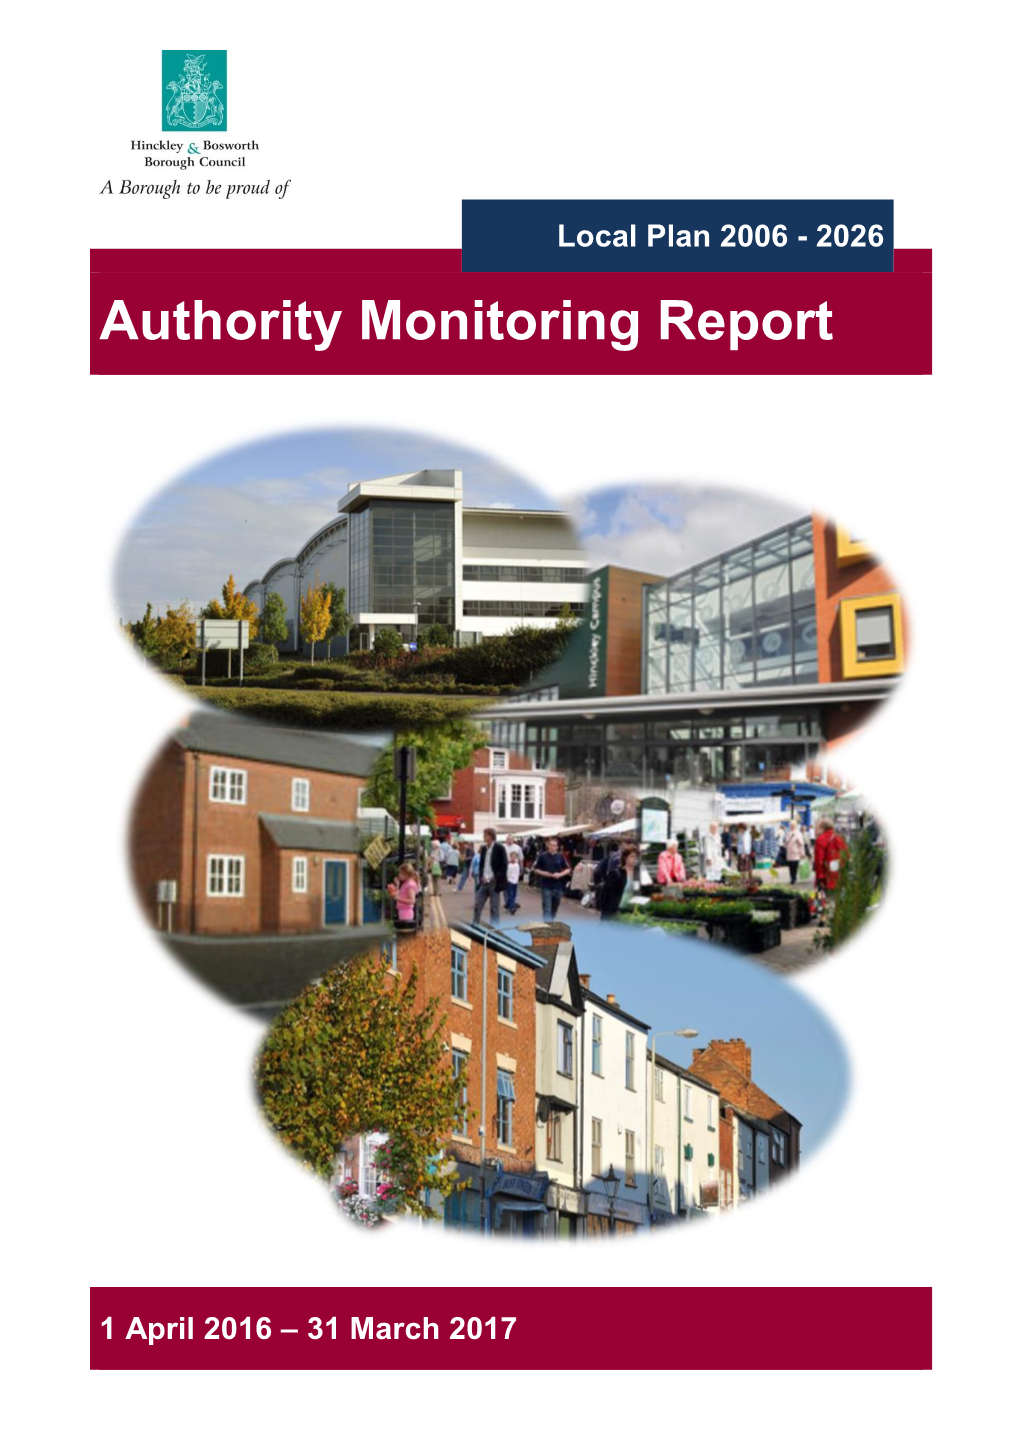 Authority Monitoring Report 2016